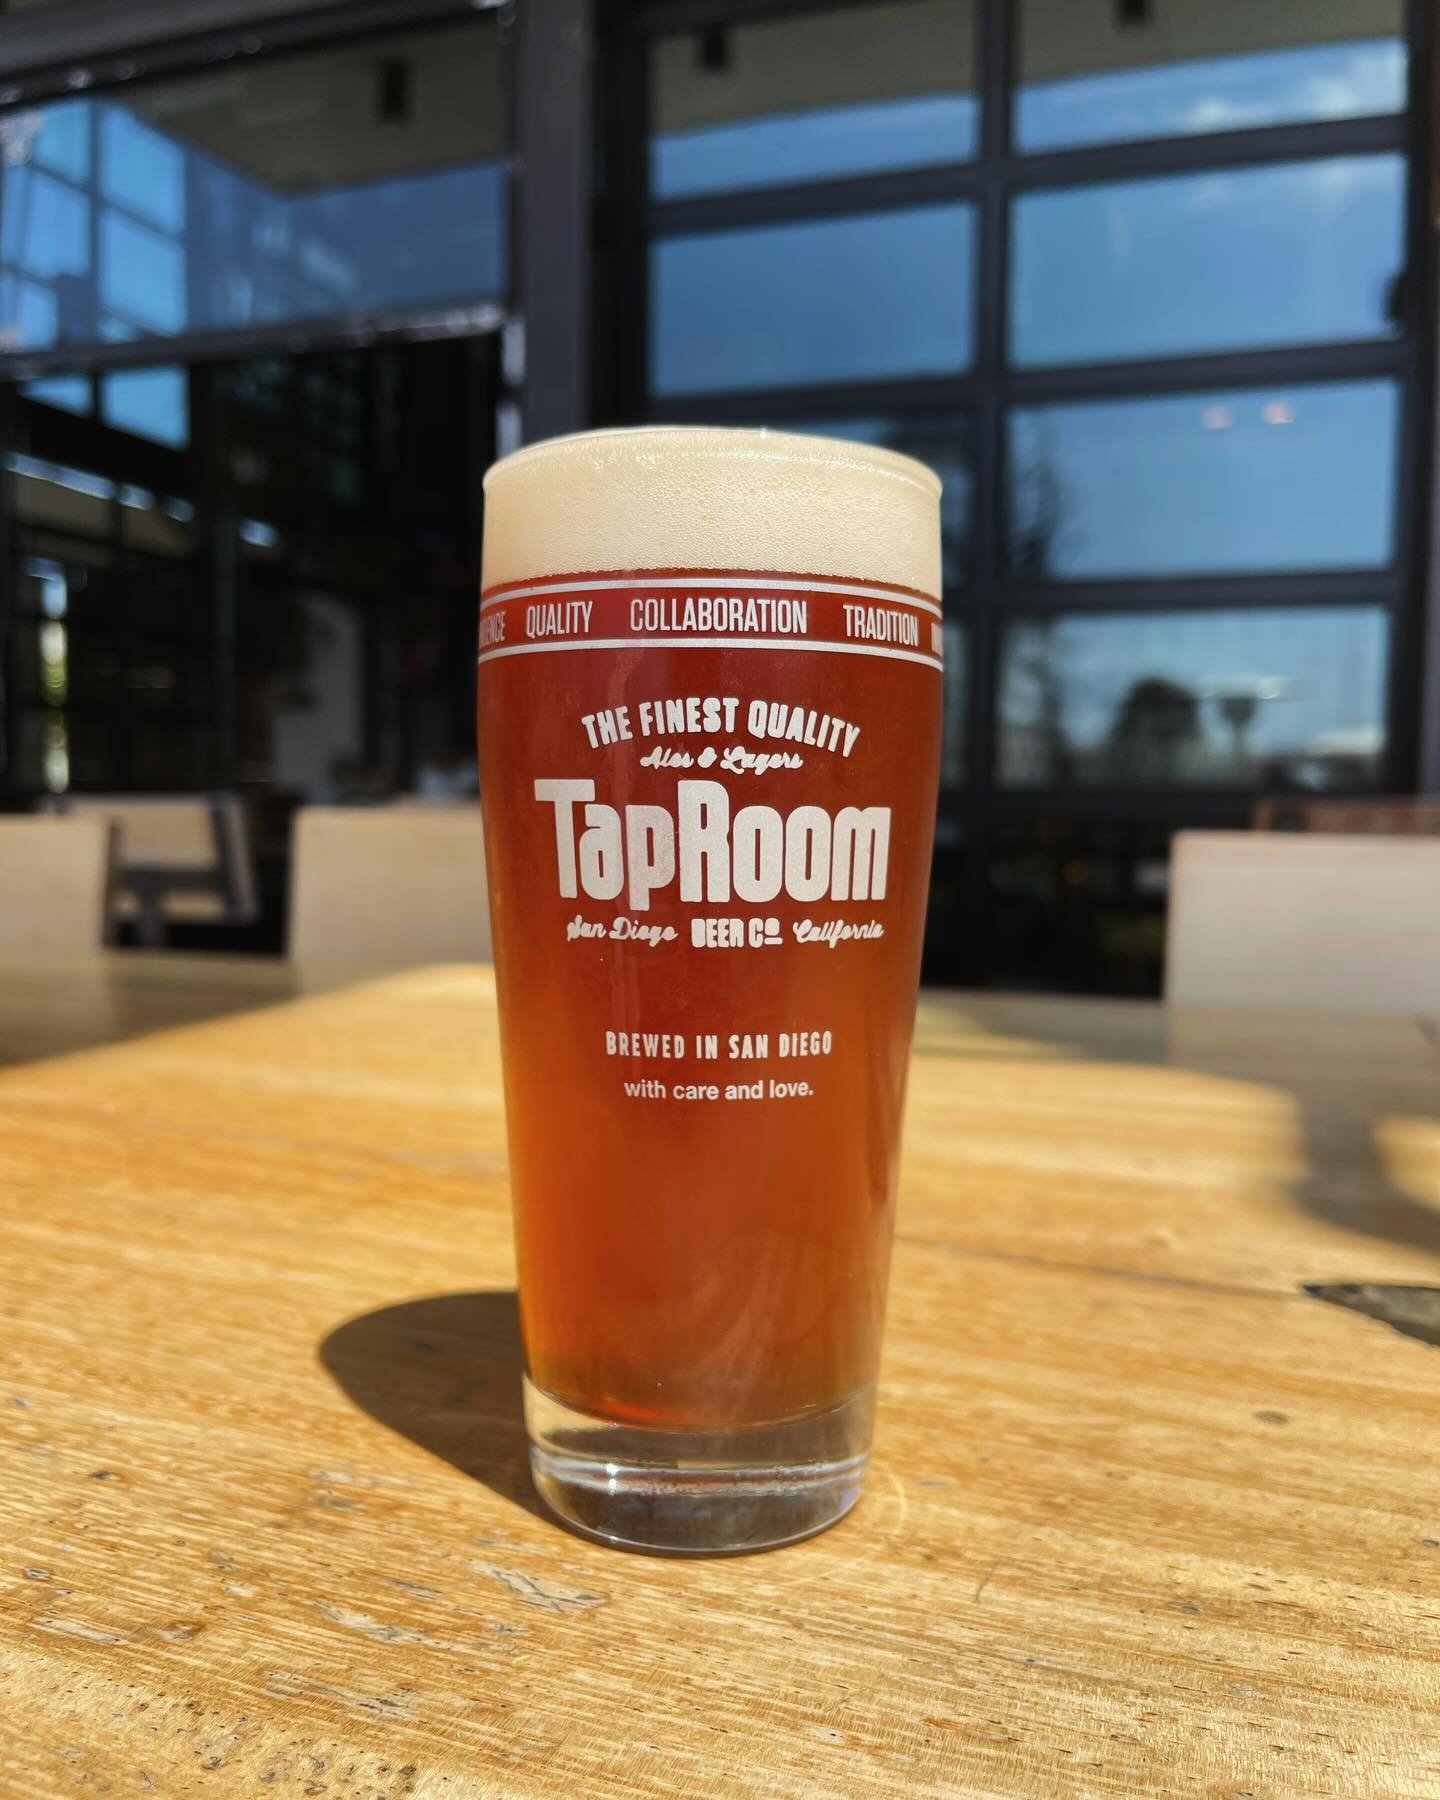 ➡️ NOW AVAILABLE ⬅️

💭 DREAM IN RED 💭
American Red IPA - 7.5% ABV

Brewed w/ Pale, Munich, &amp; Specialty Malts &amp; hopped aggressively w/ Citra, Simcoe, &amp; Columbus Hops. This dreamy brew features characterful malt expression w/ a dense hop 